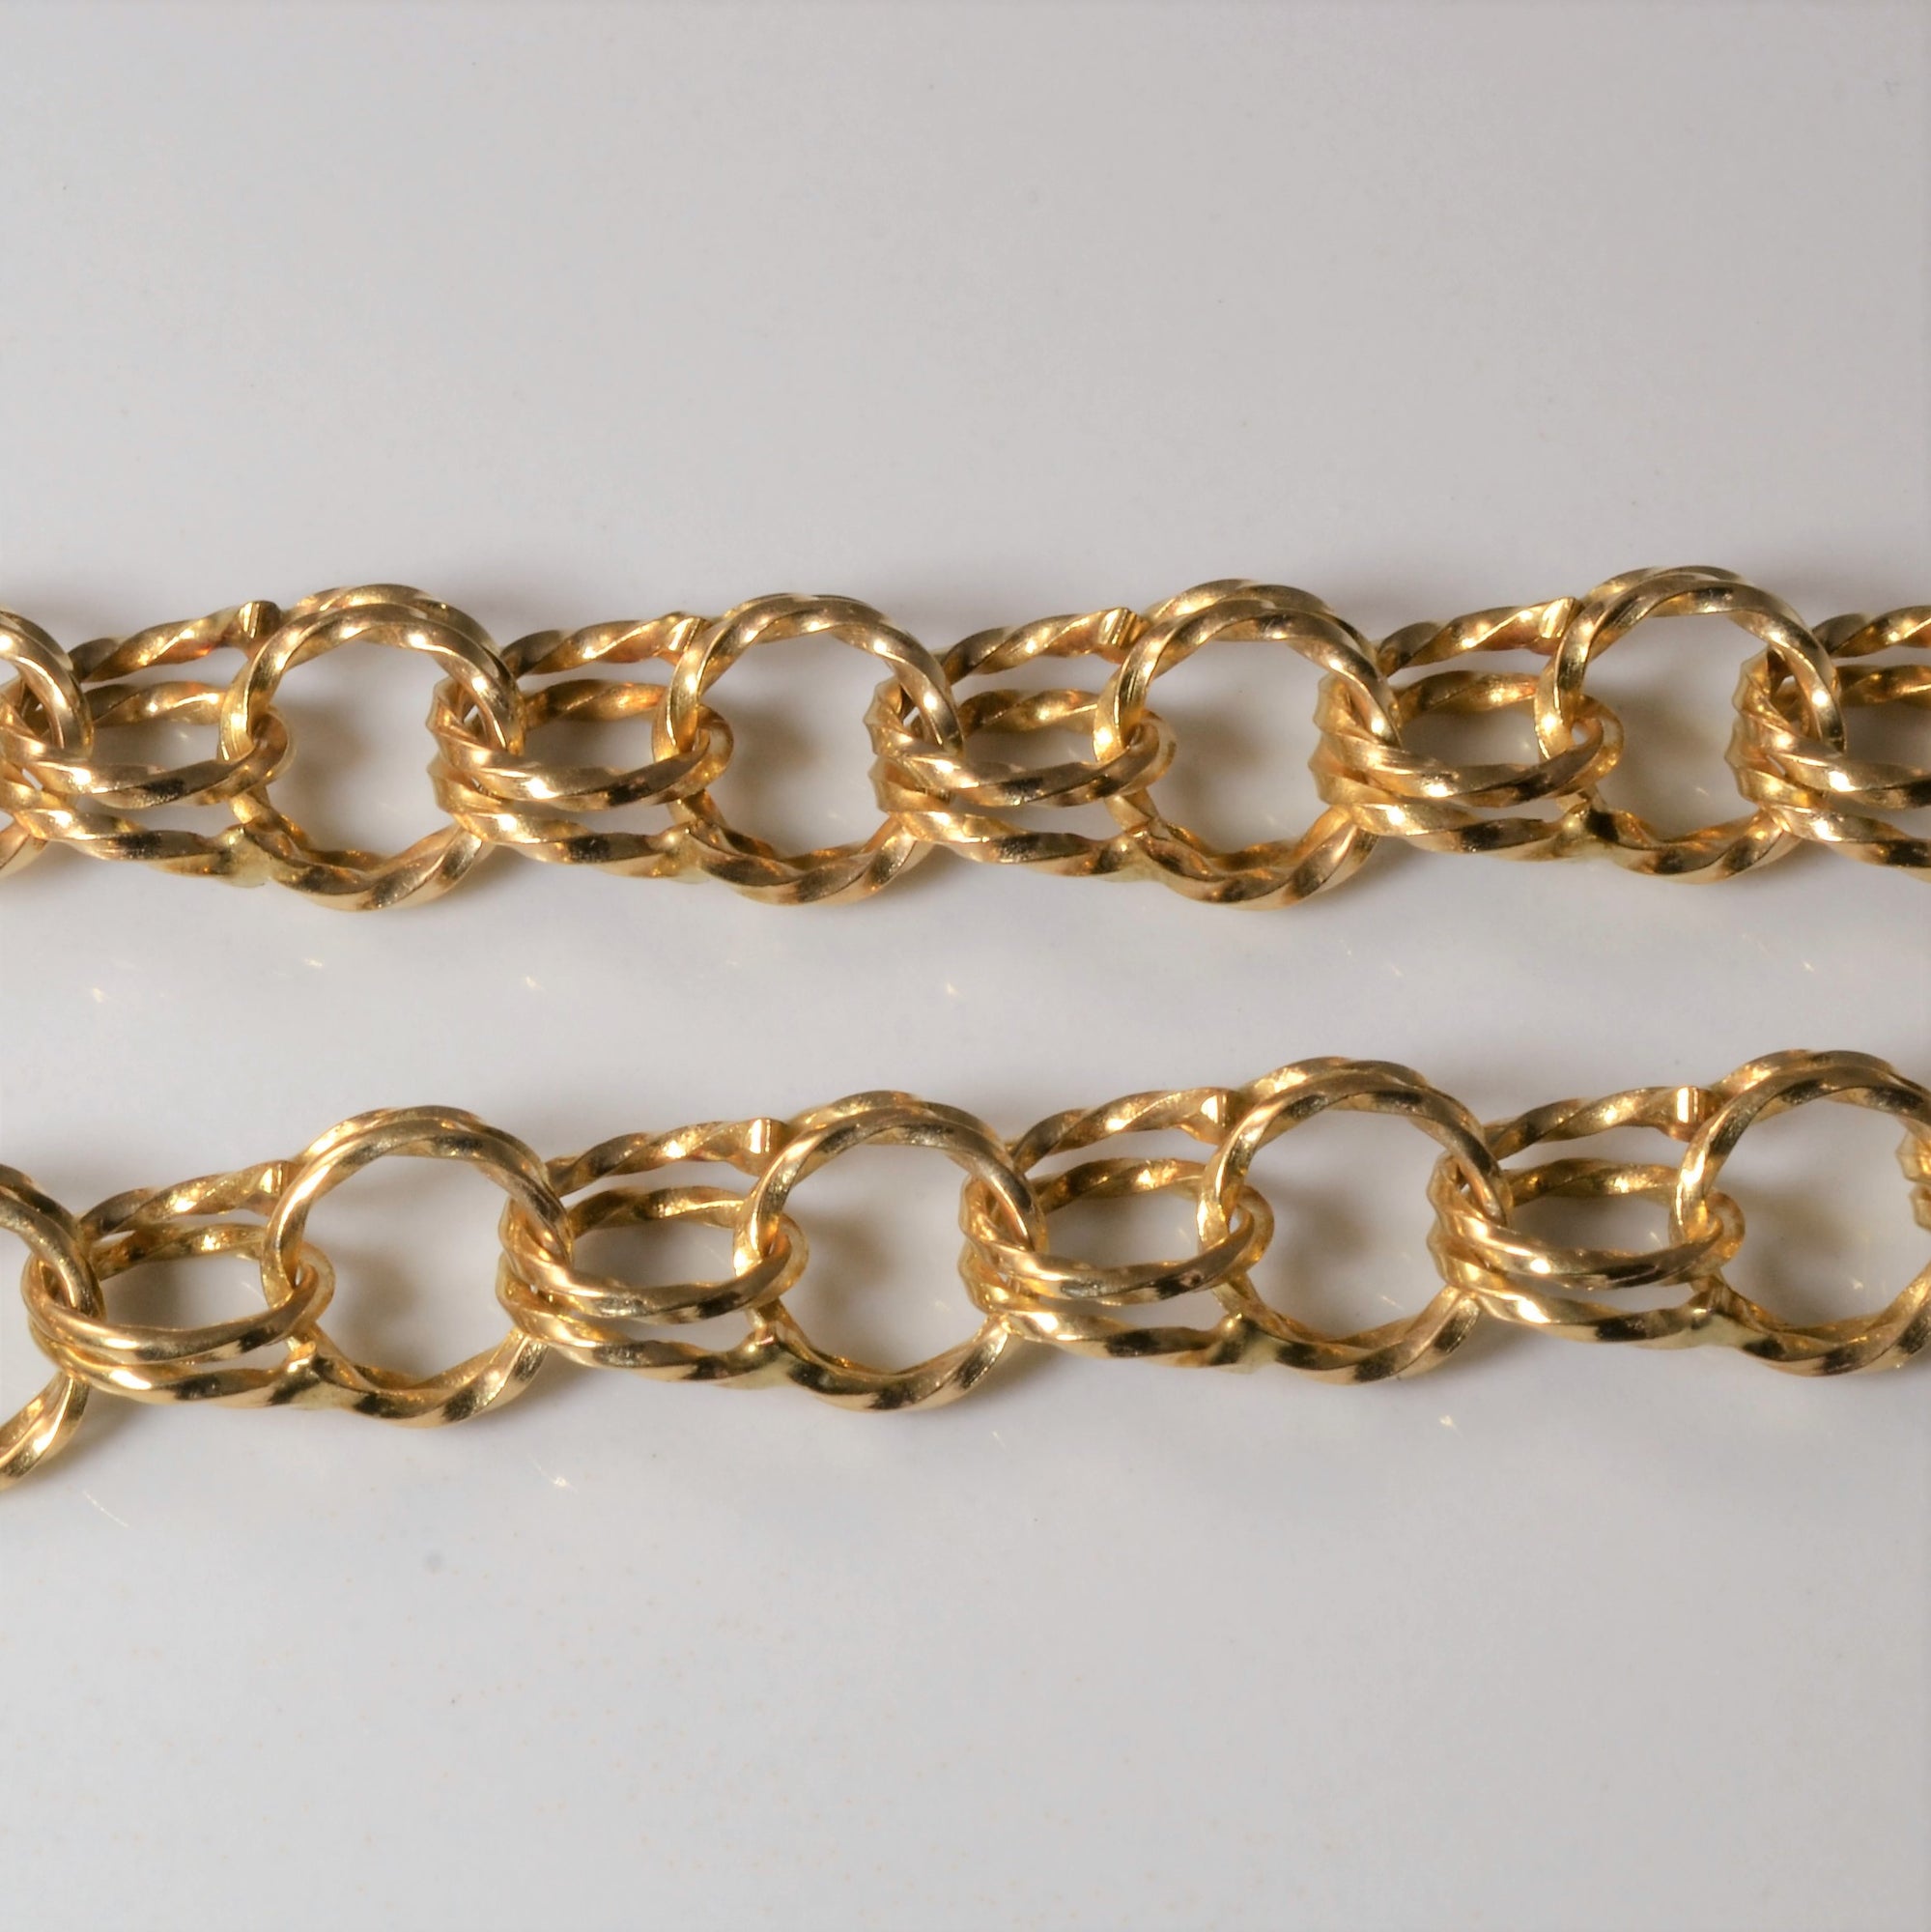 10k Yellow Gold Twisted Parallel Link Bracelet | 7